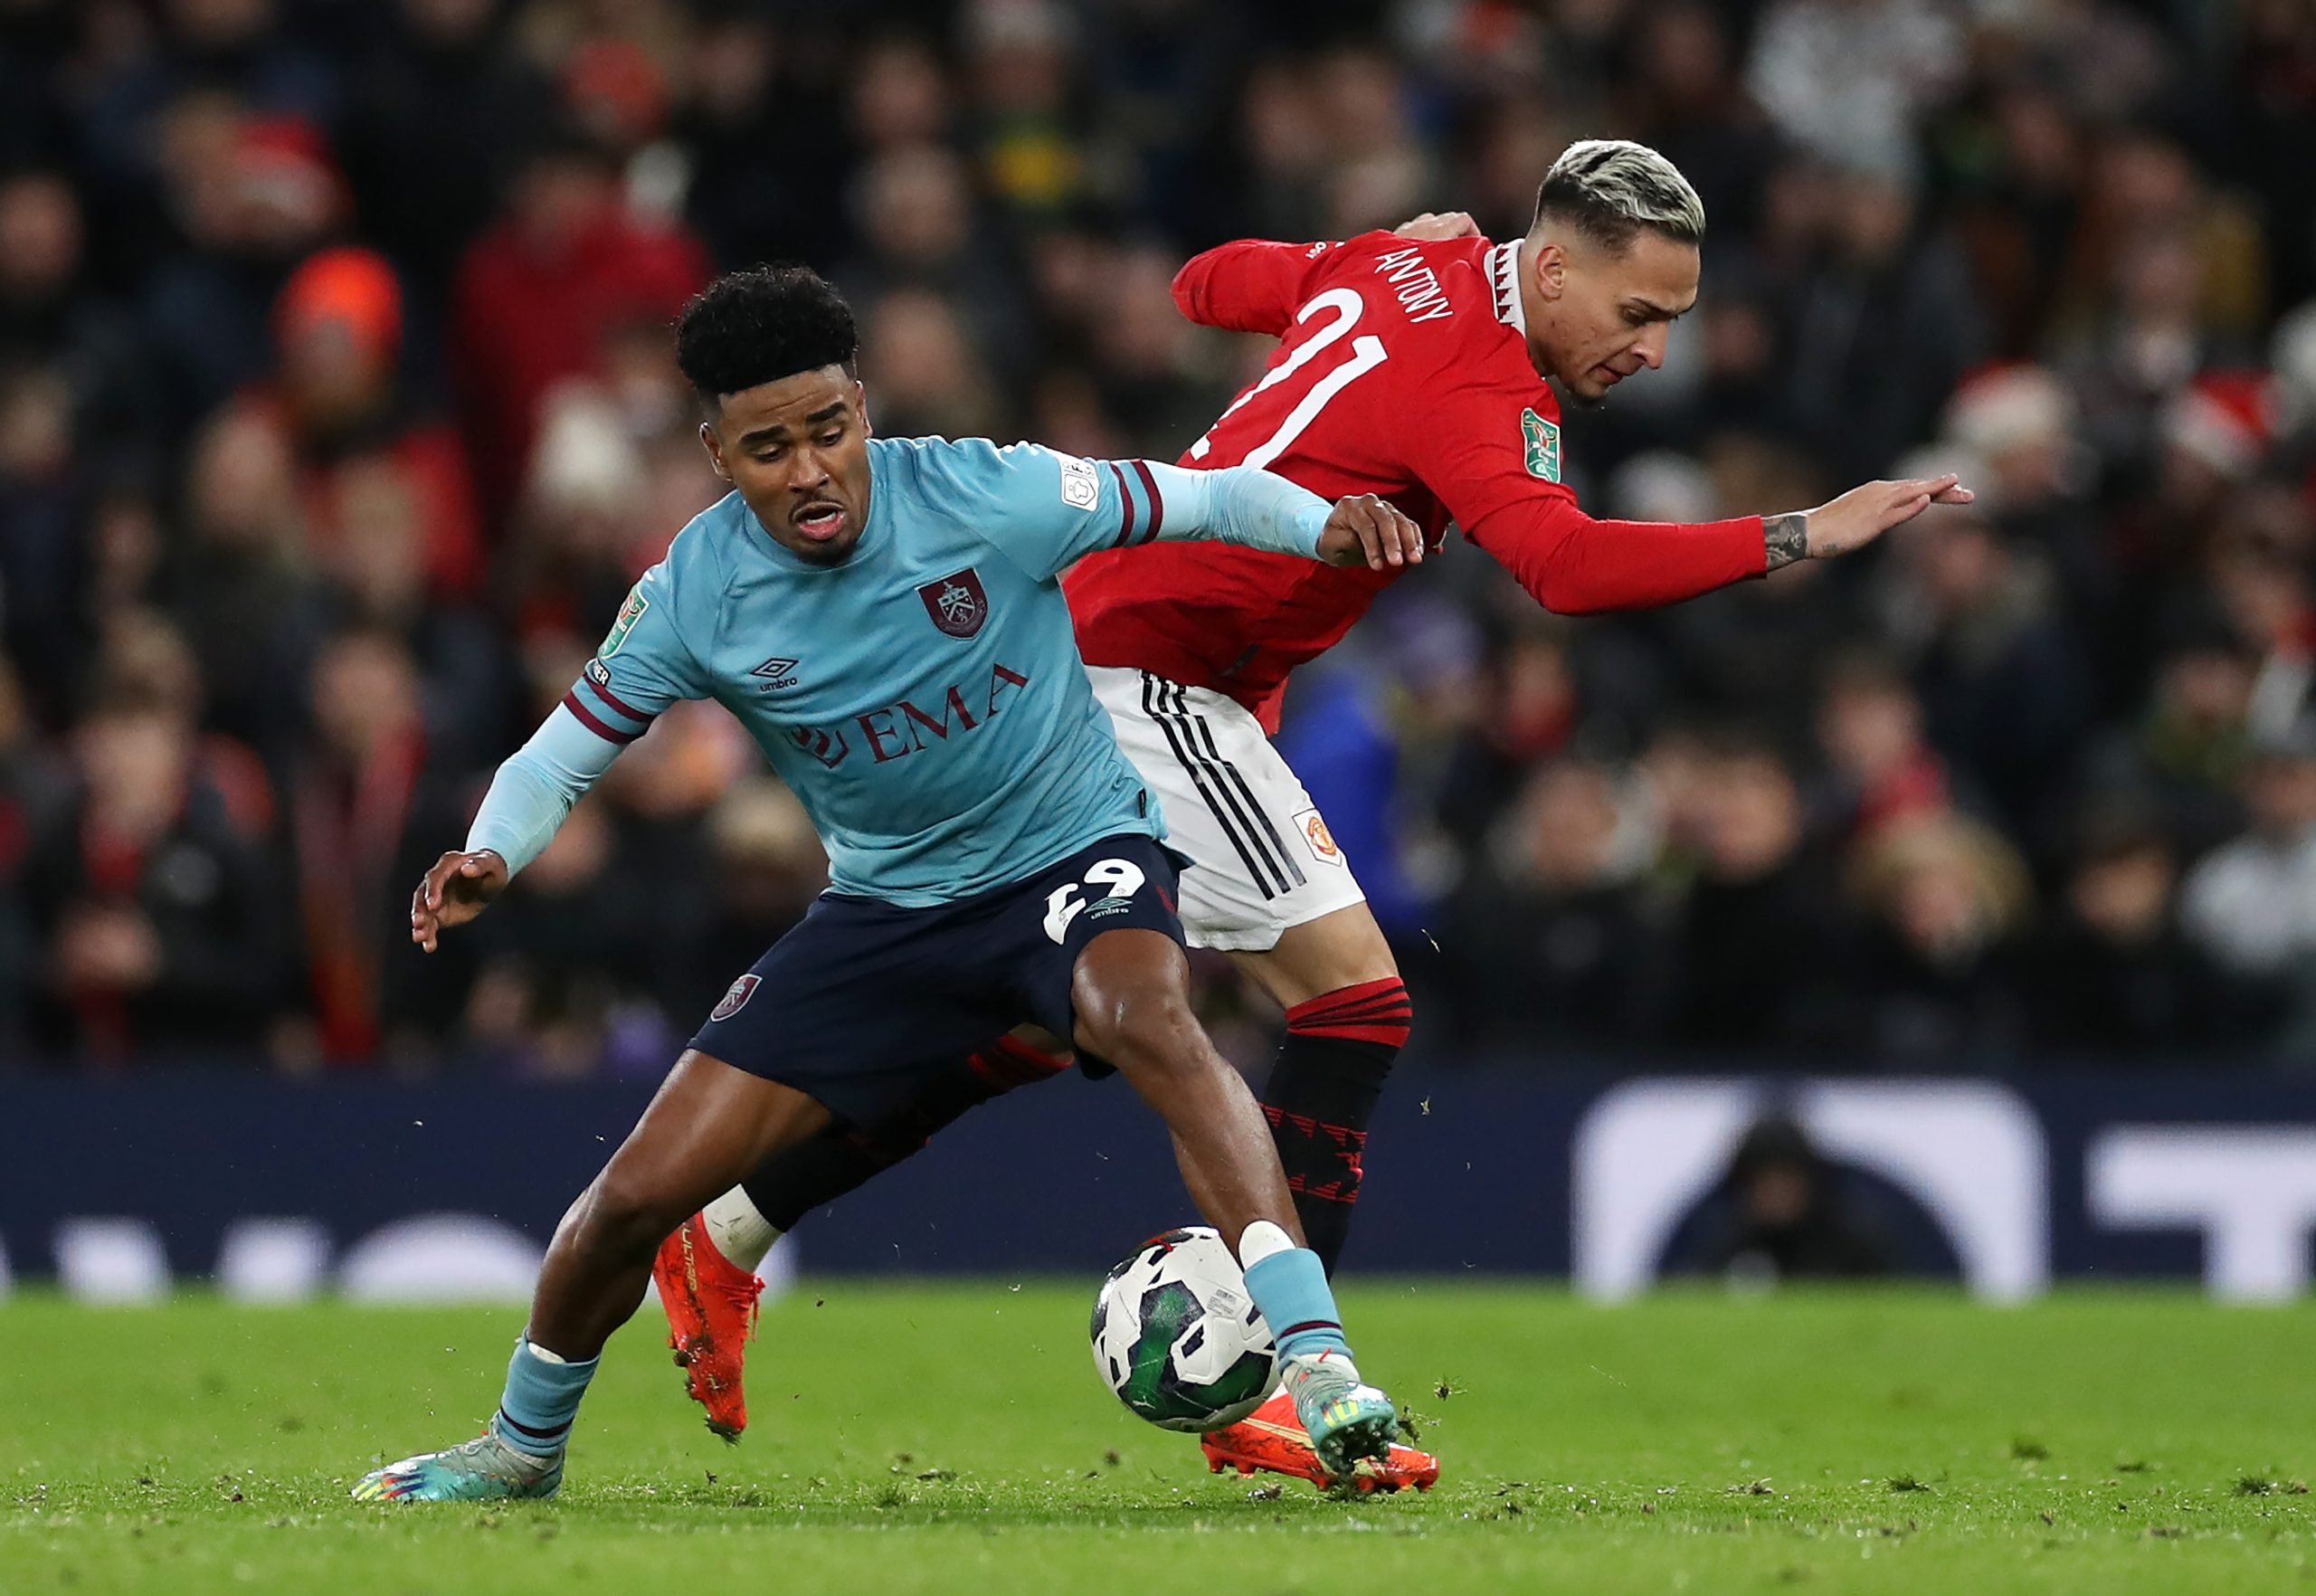 Ian Maatsen of Burnley is challenged by Antony of Manchester United during a Carabao Cup Fourth Round match.